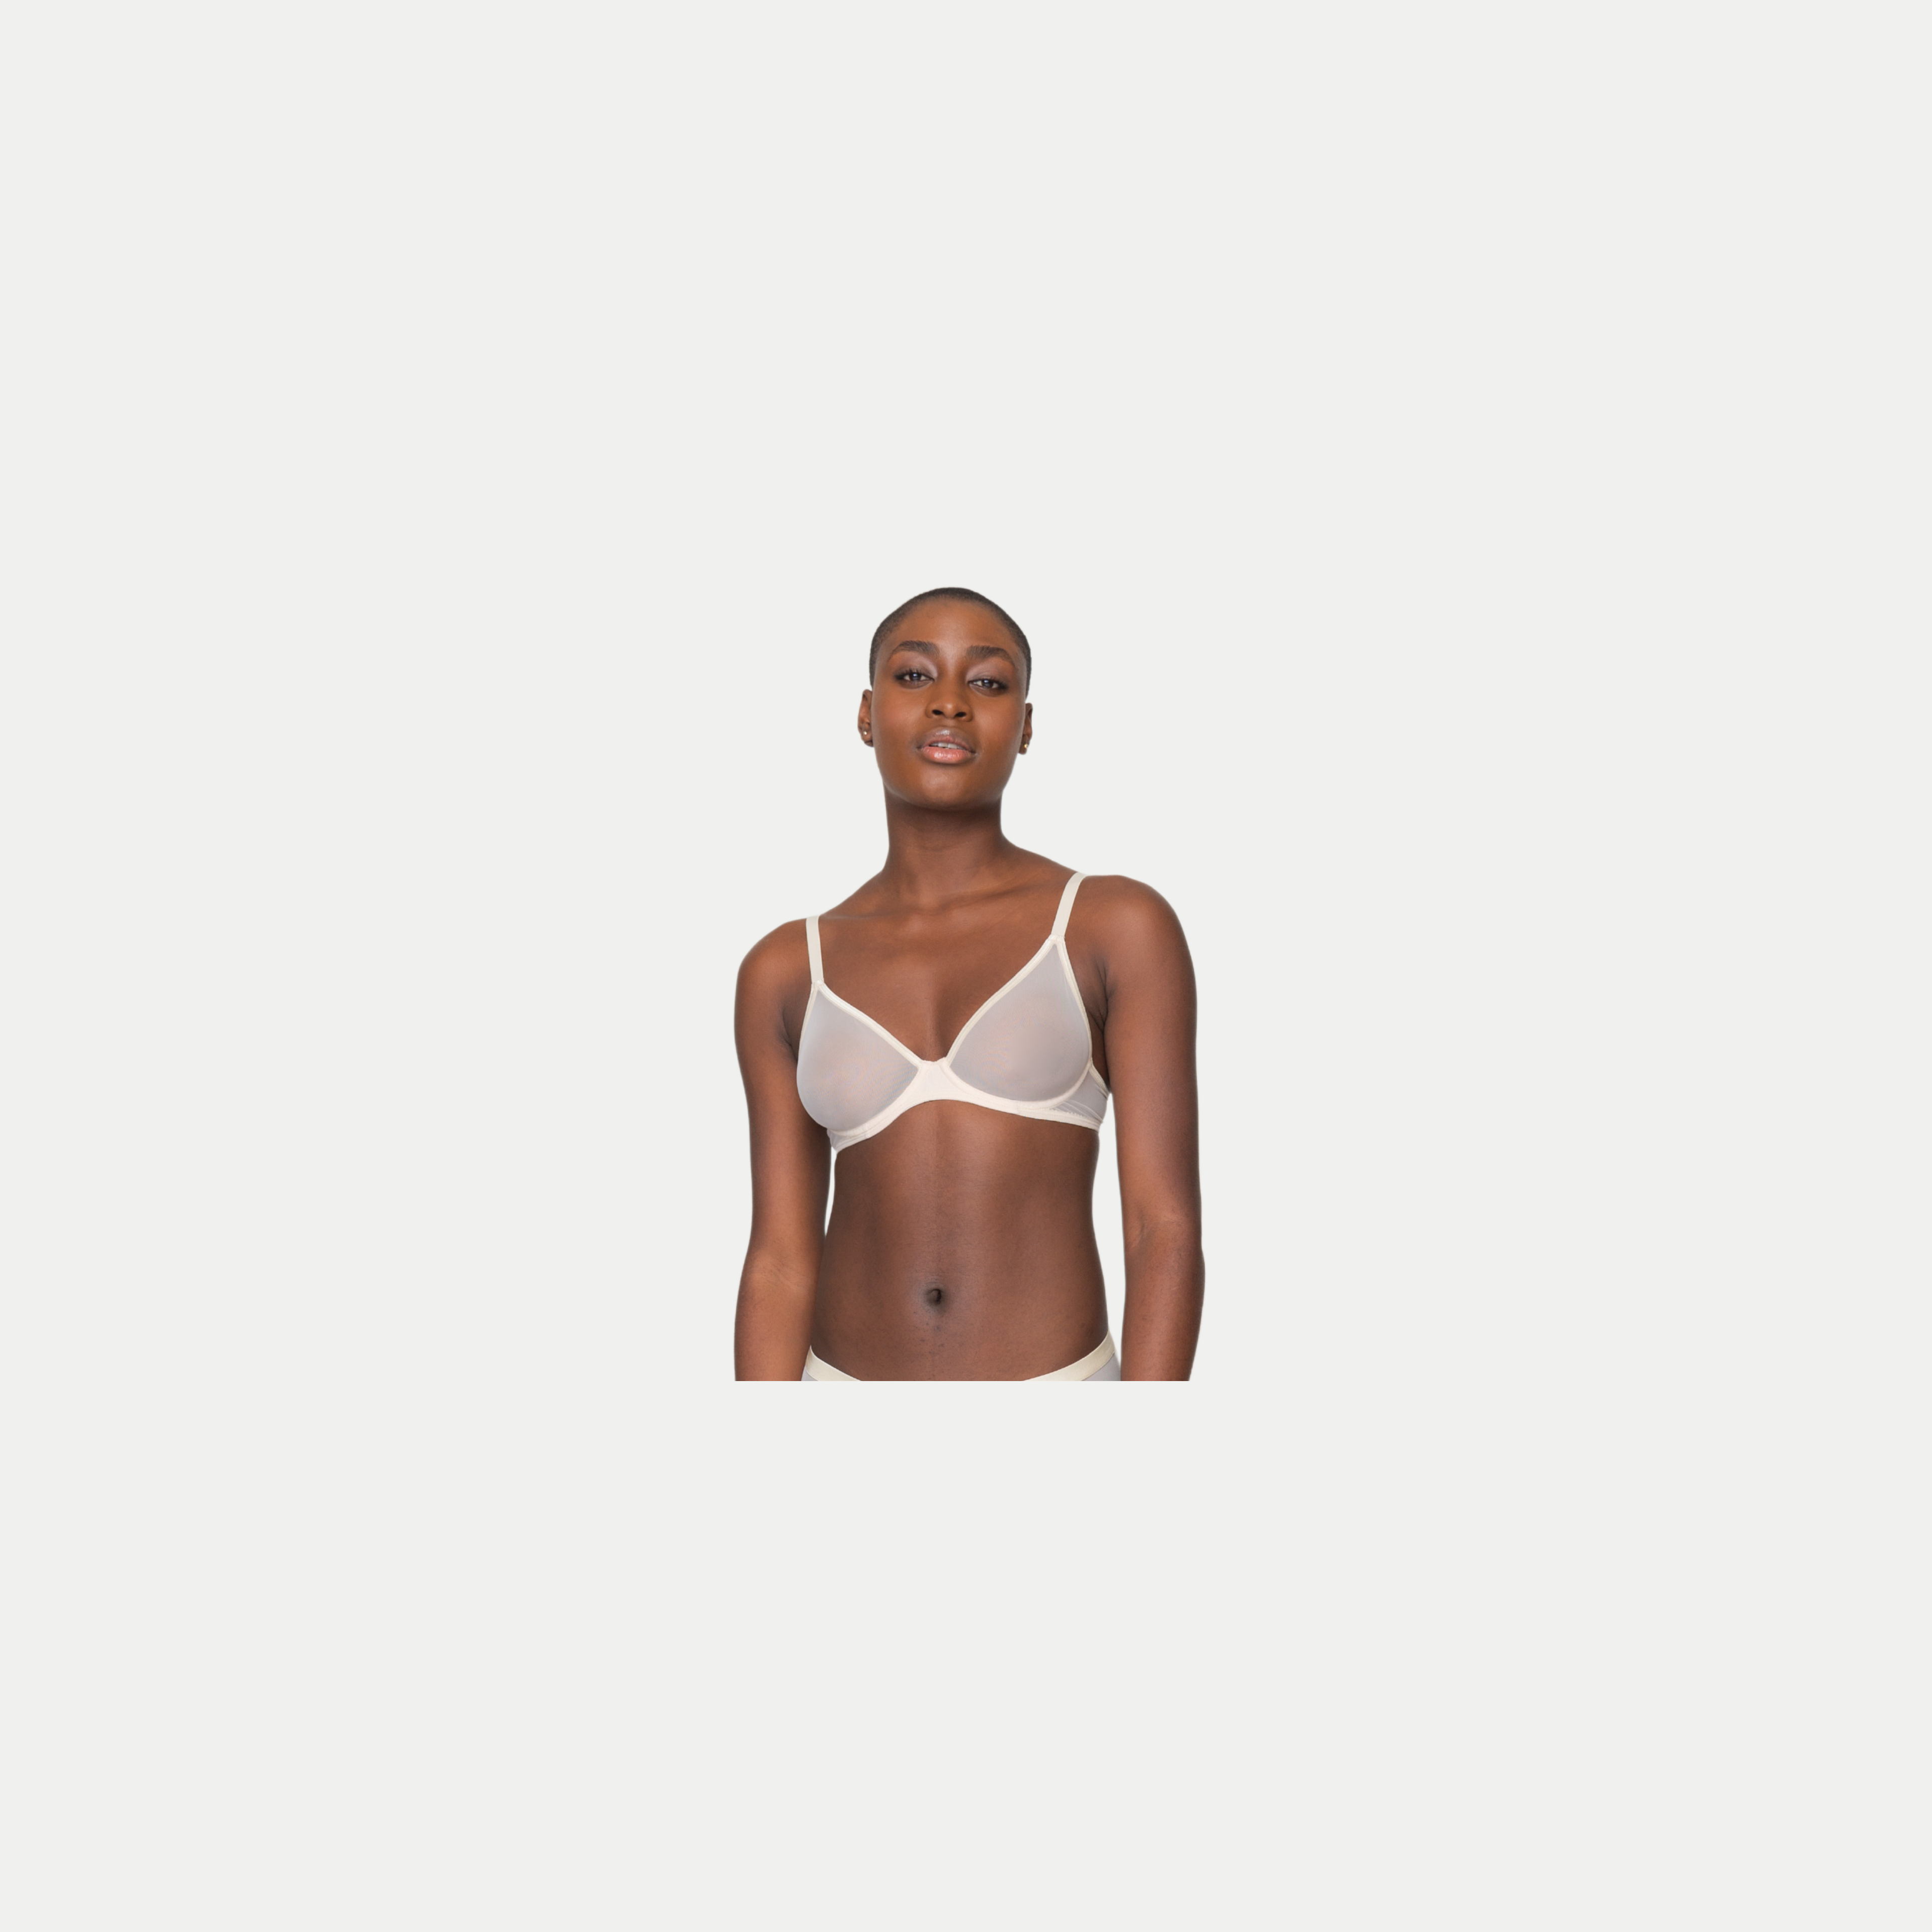 The Spacer Balconette Bra: Toasted Almond